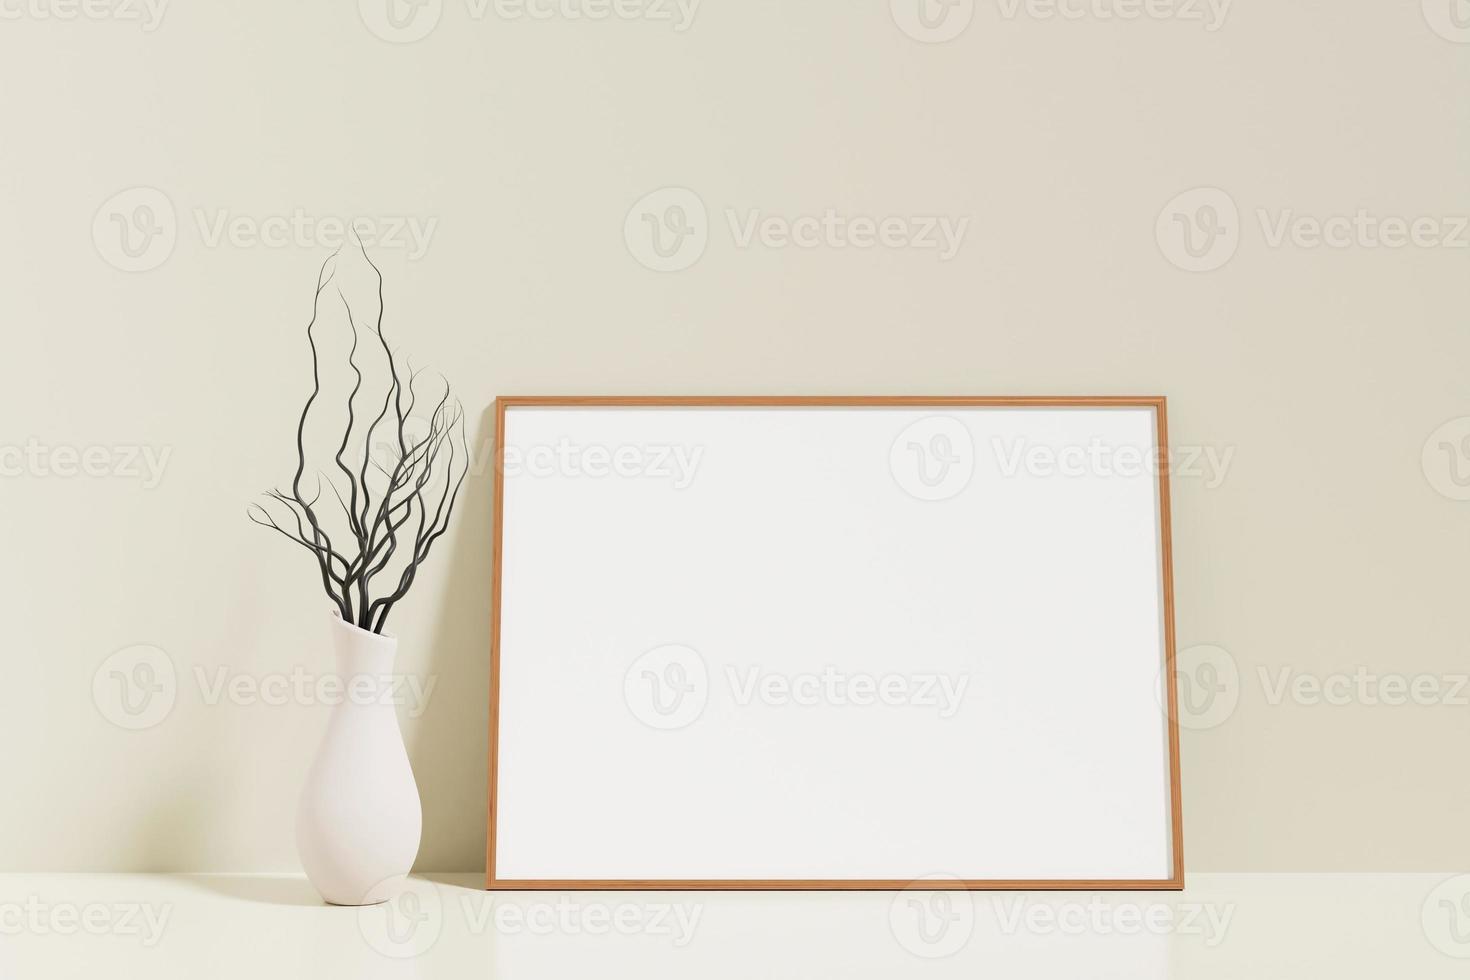 Minimalist and clean horizontal wooden poster or photo frame mockup on the floor leaning against the room wall with vase